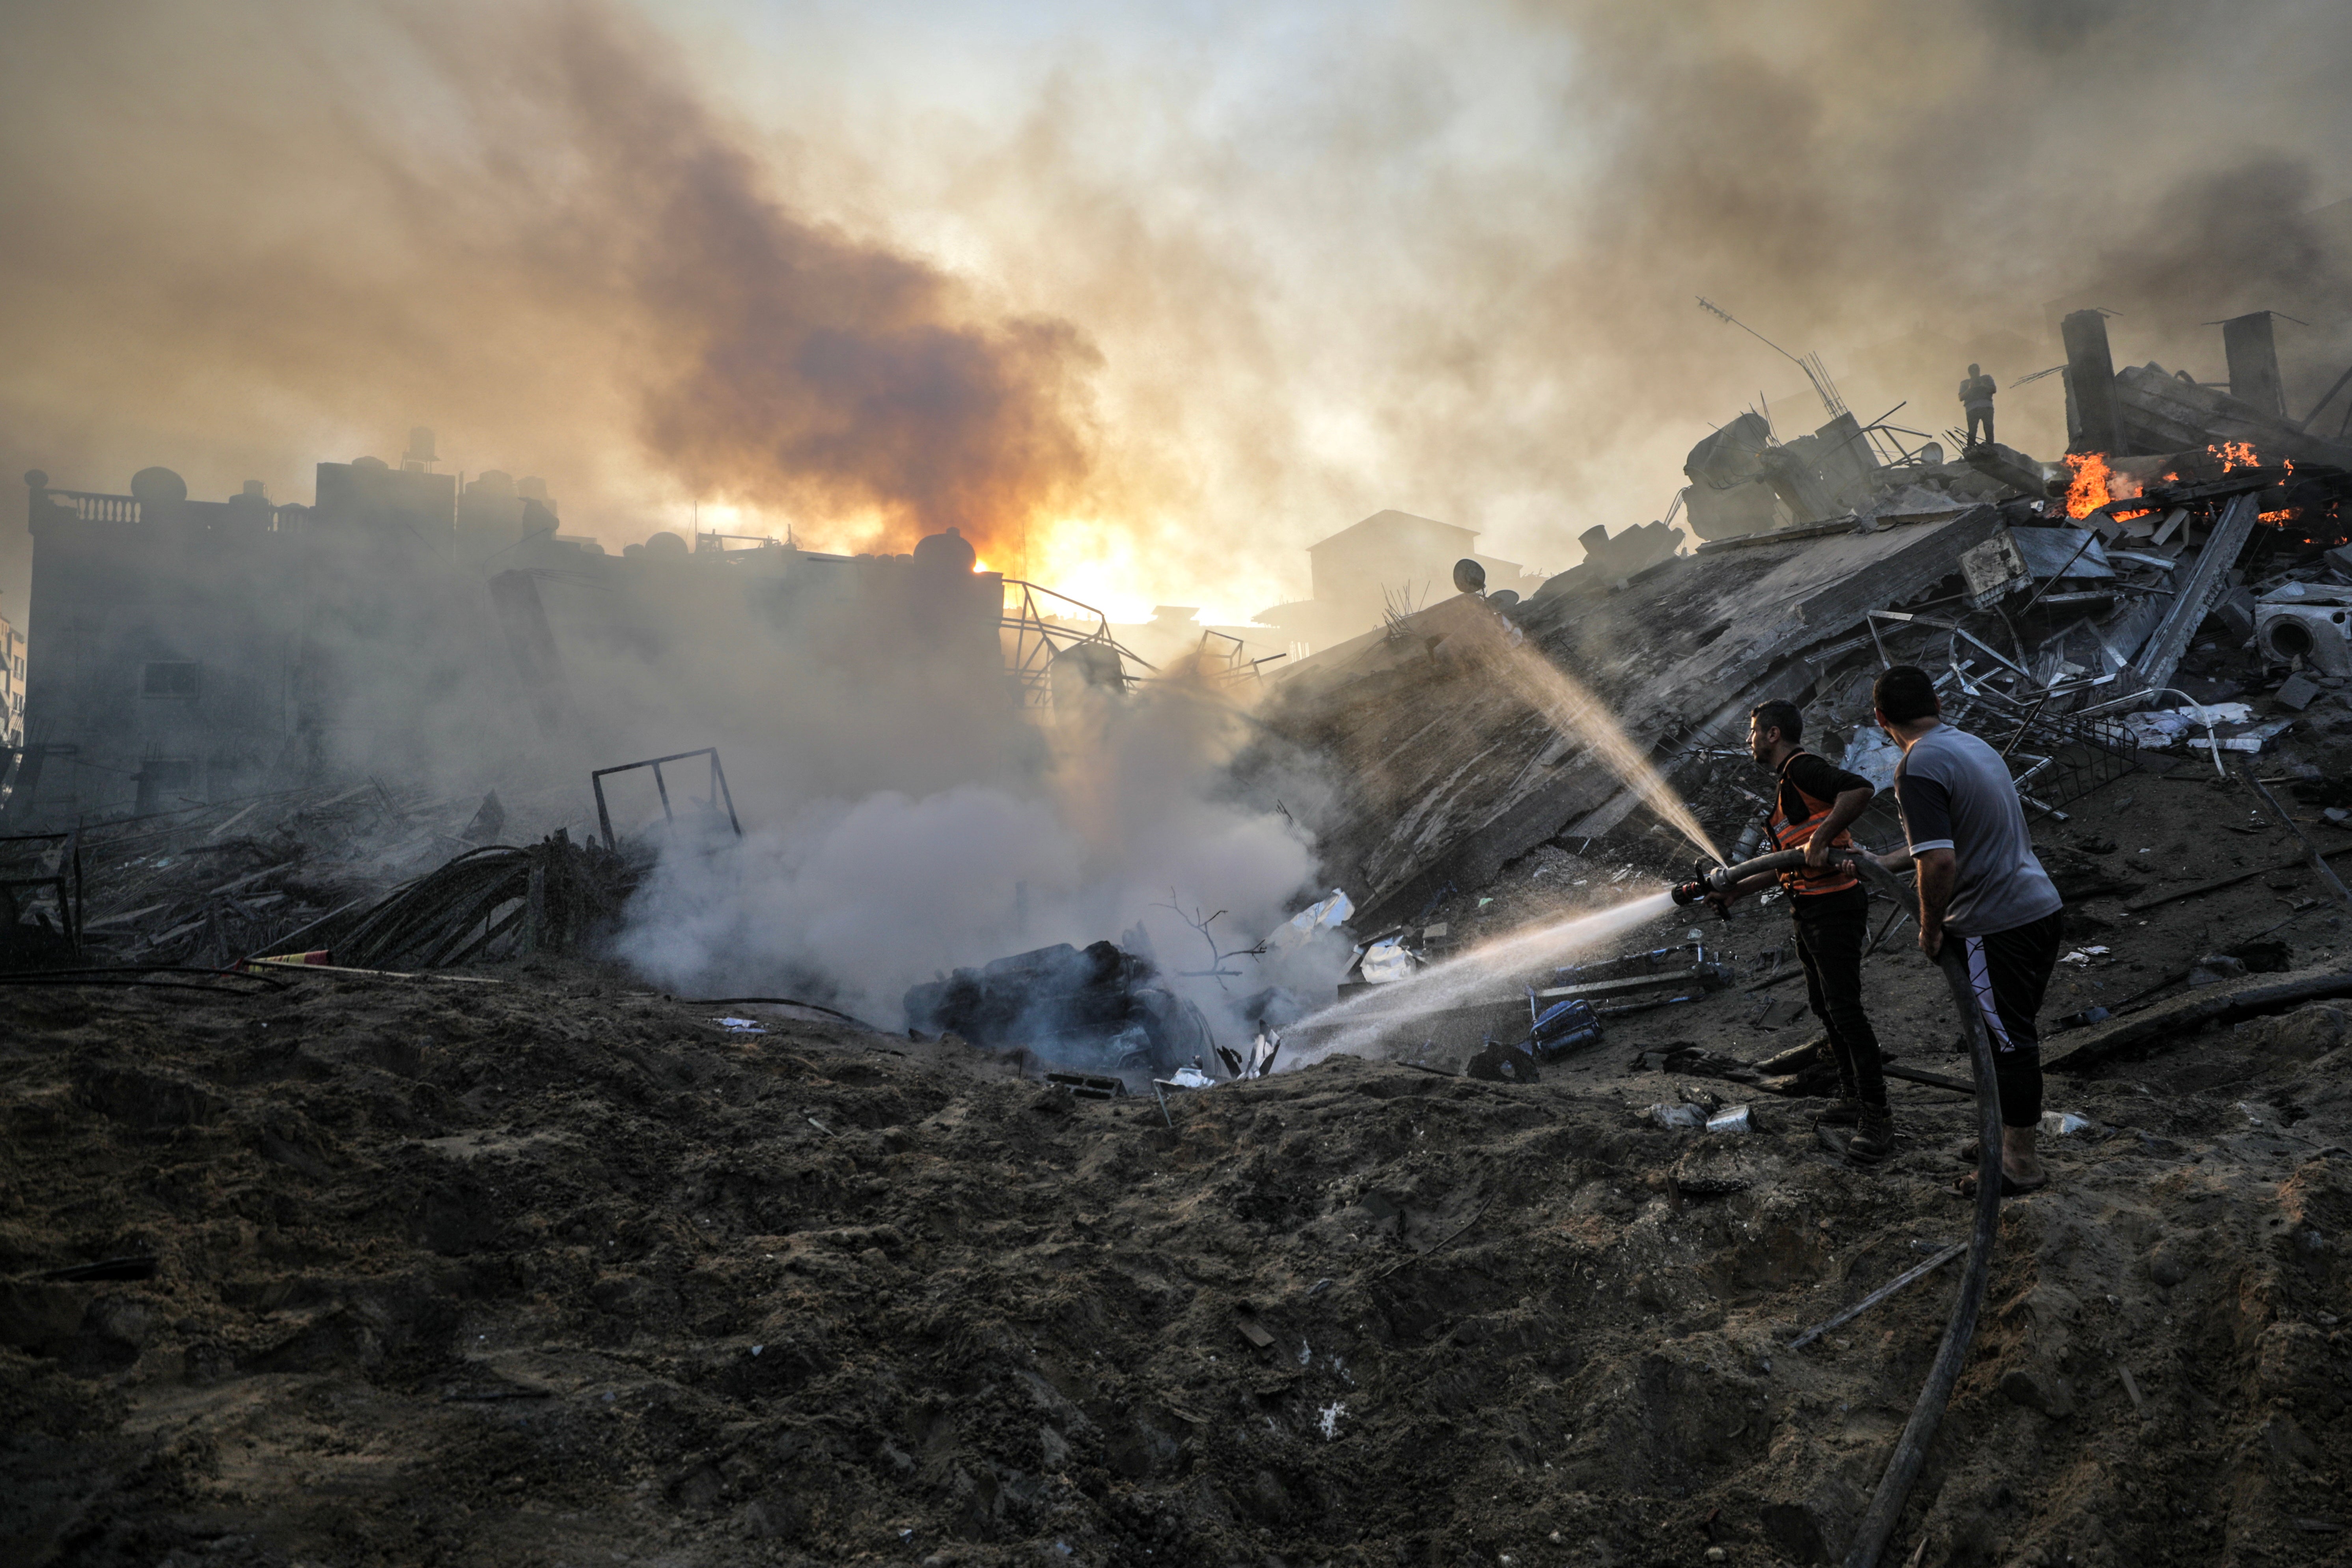 Palestinians try to put out a fire at a destroyed area following Israeli air strikes in Gaza City